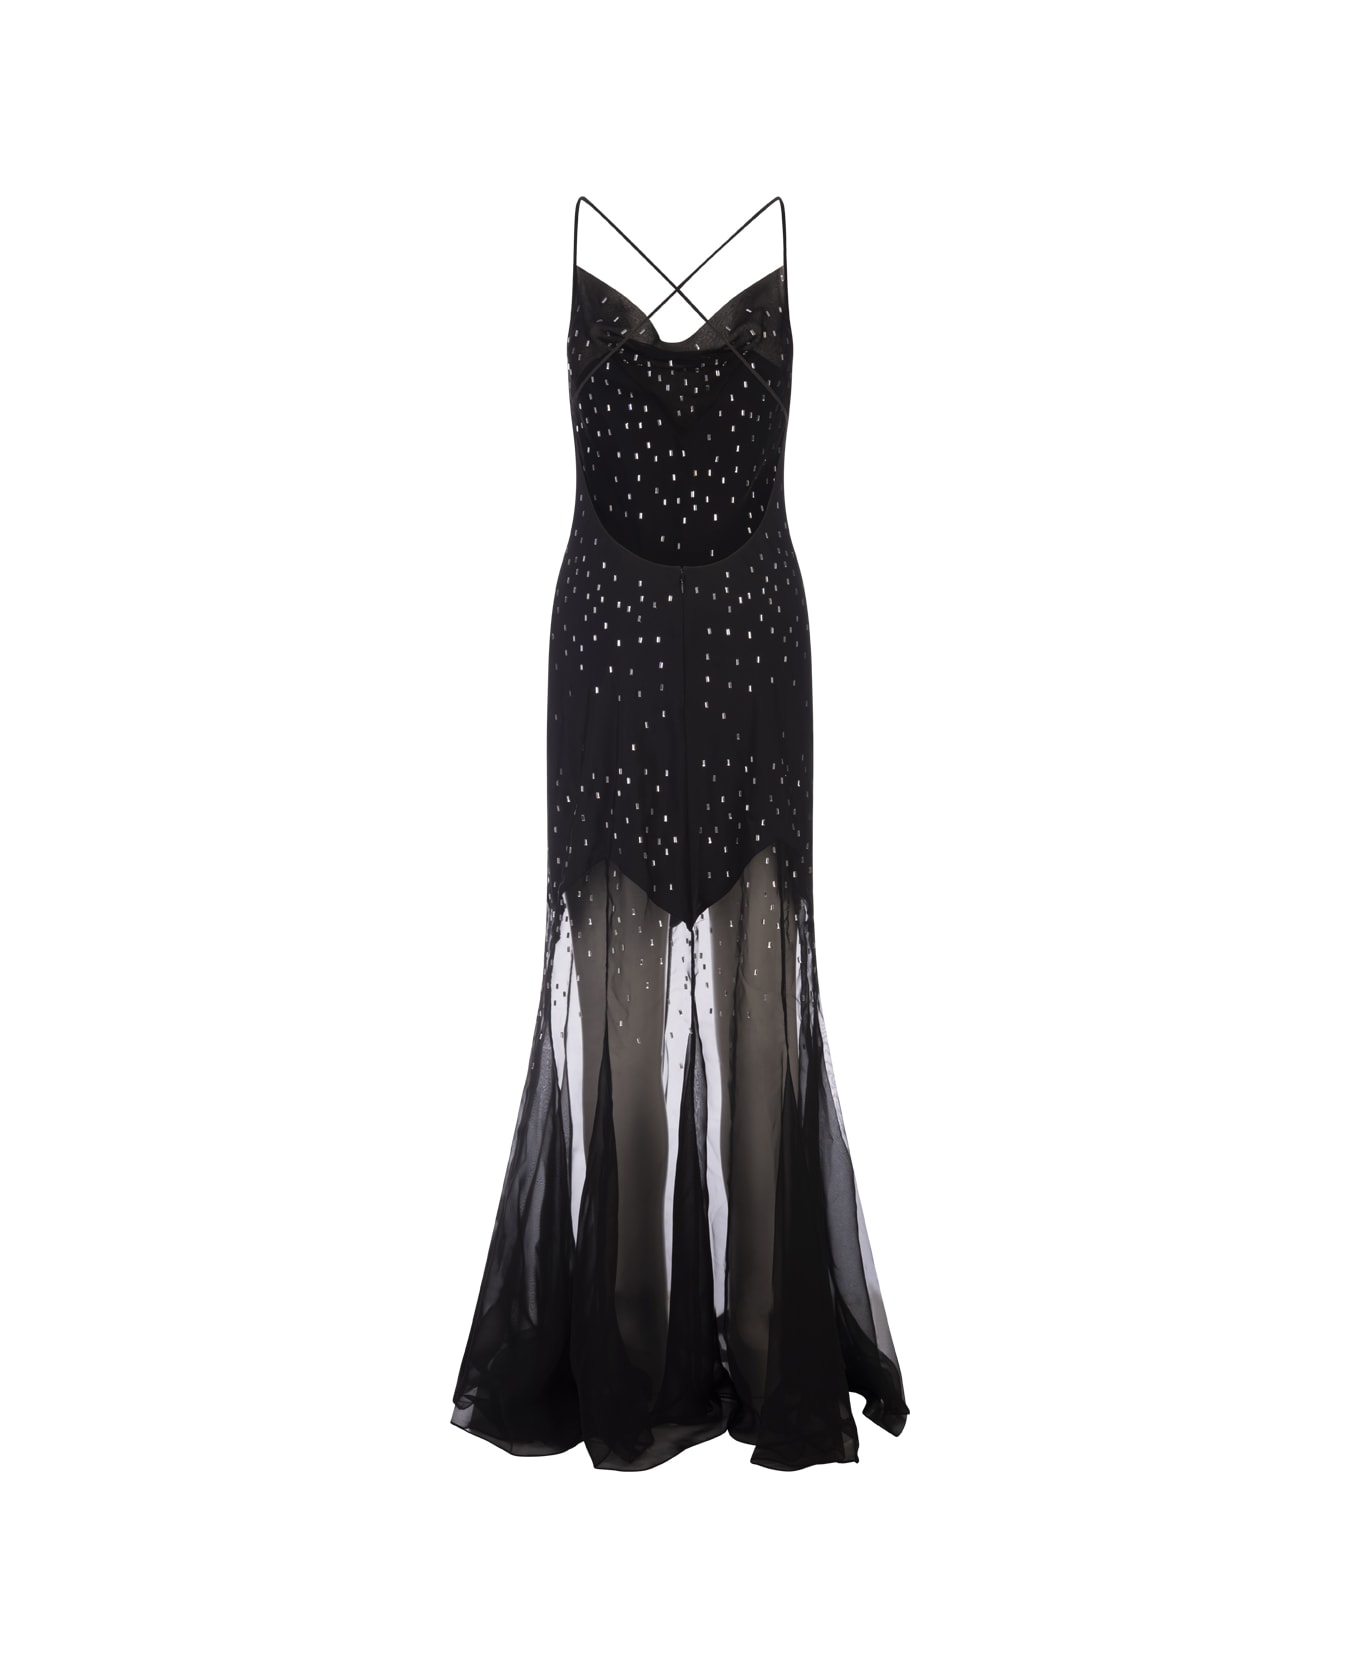 Paco Rabanne Long Black Dress With Crystals - Black